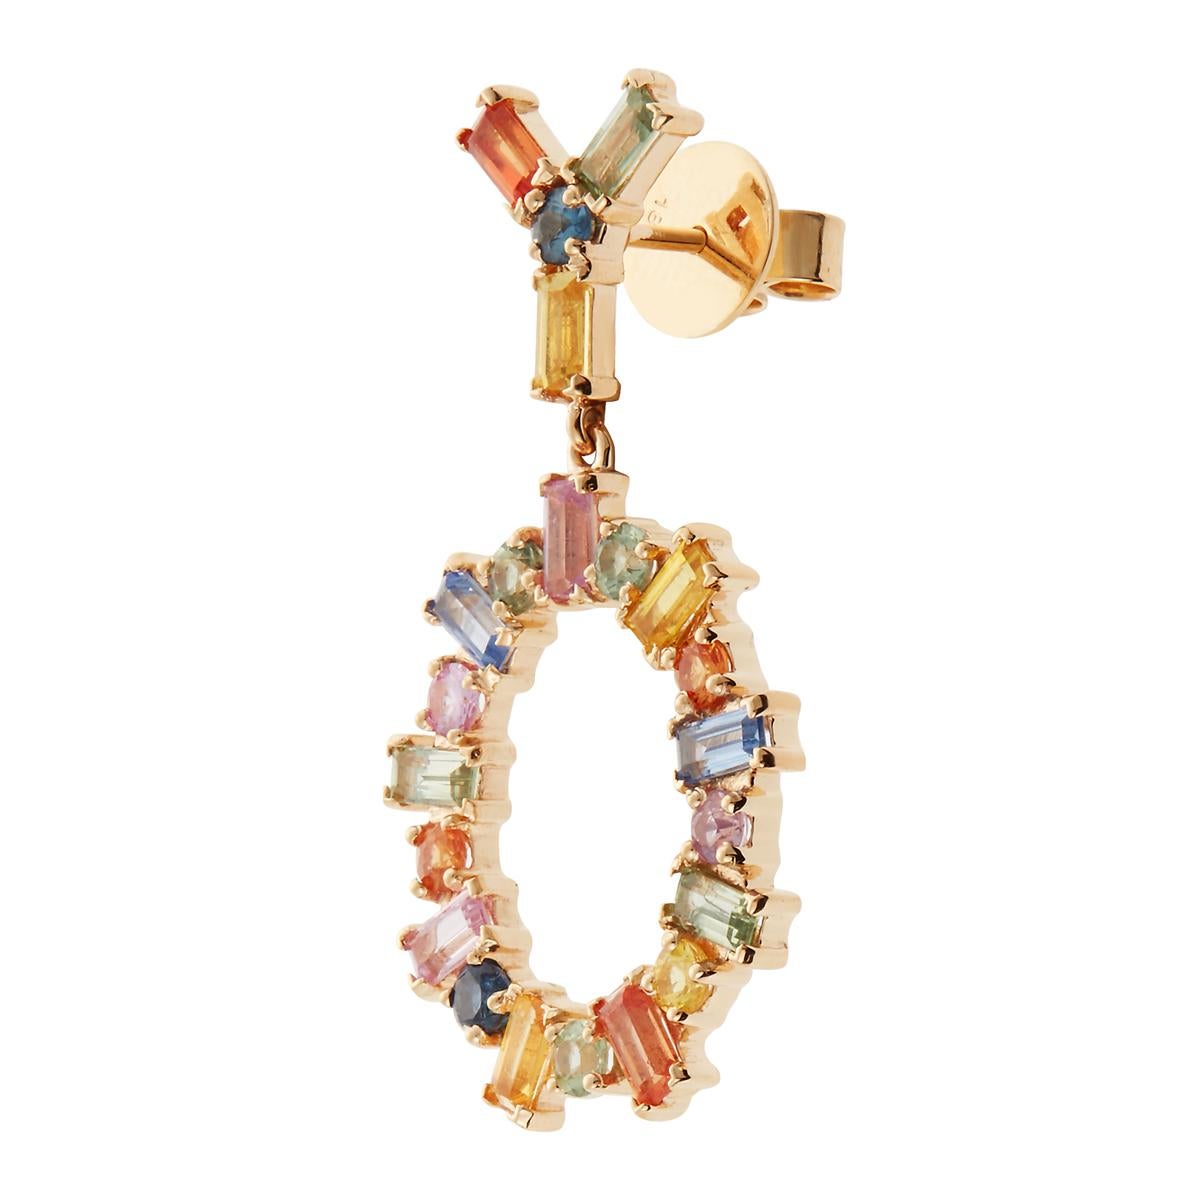 These multi-colored sapphire Baguette Again earrings are Handcrafted from 18-karat yellow gold, this circular pair drops from a Y-shaped stud and is inlaid with 2.32-carats of multi-colored baguette and round-cut sapphires. Showcase yours with a